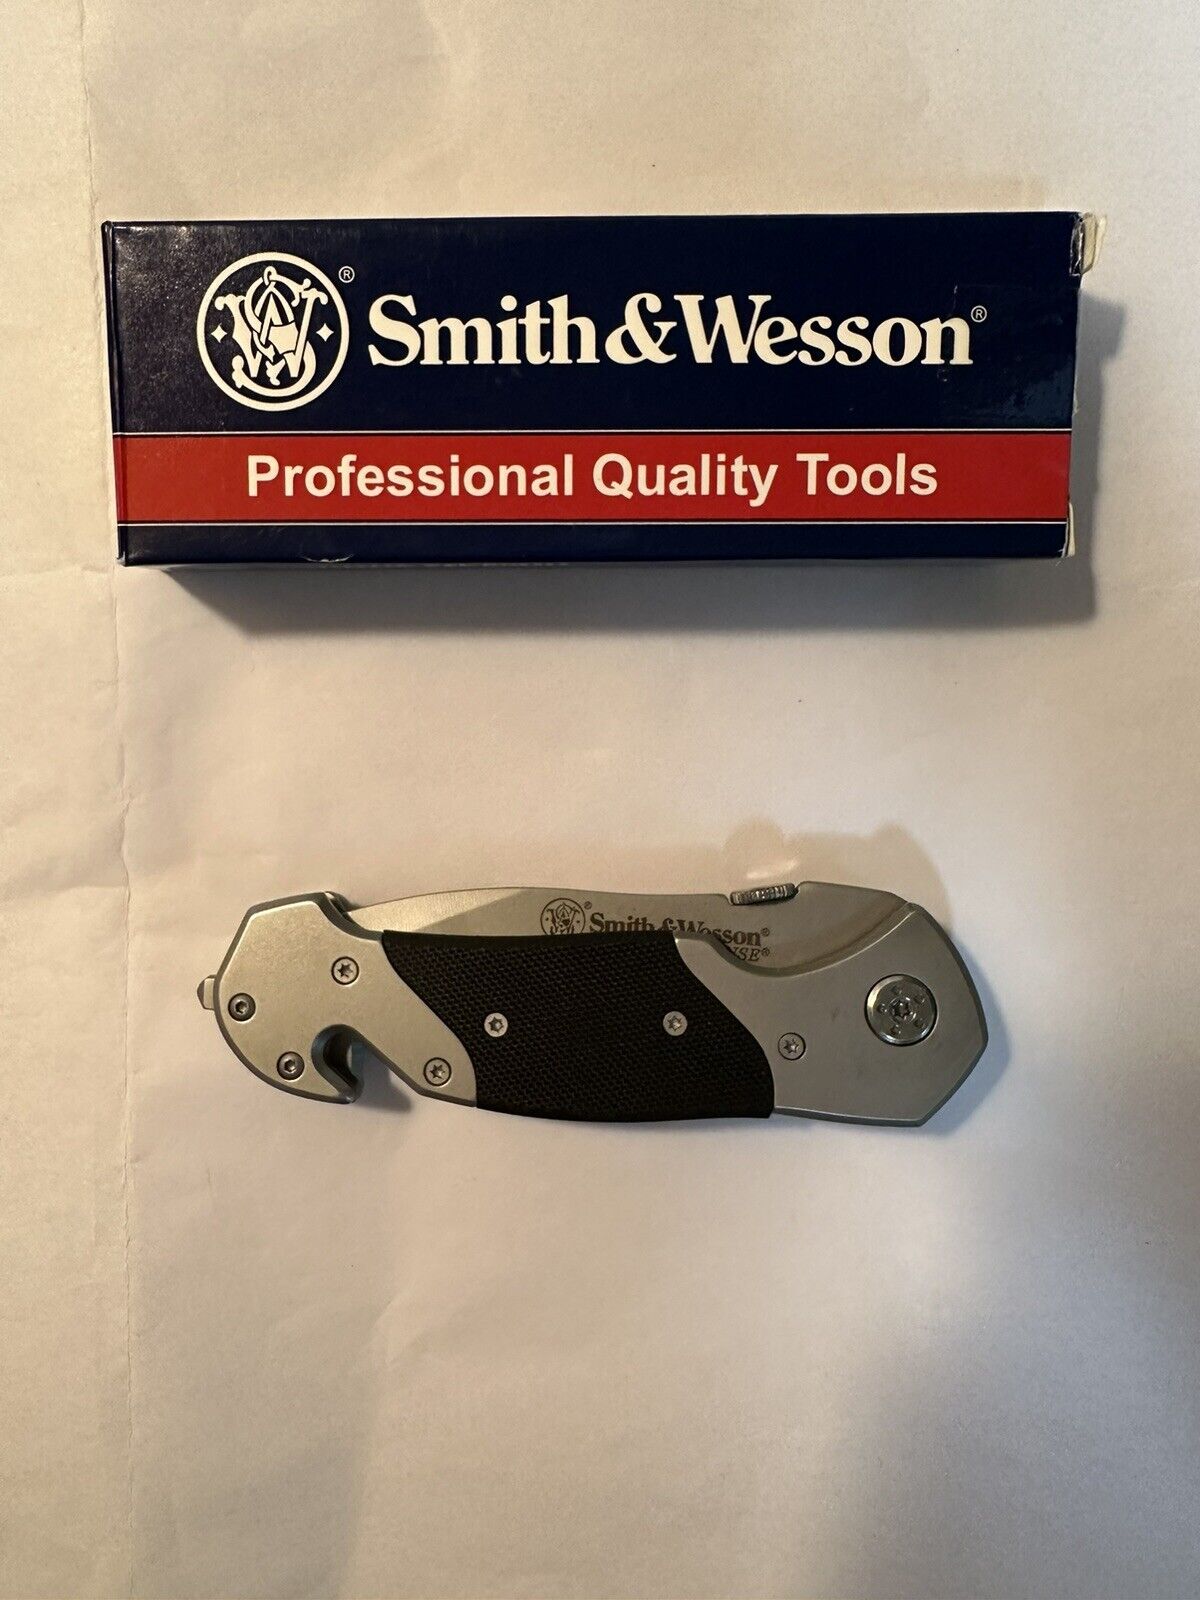 Smith & Wesson First Response Drop Point Folding Knife